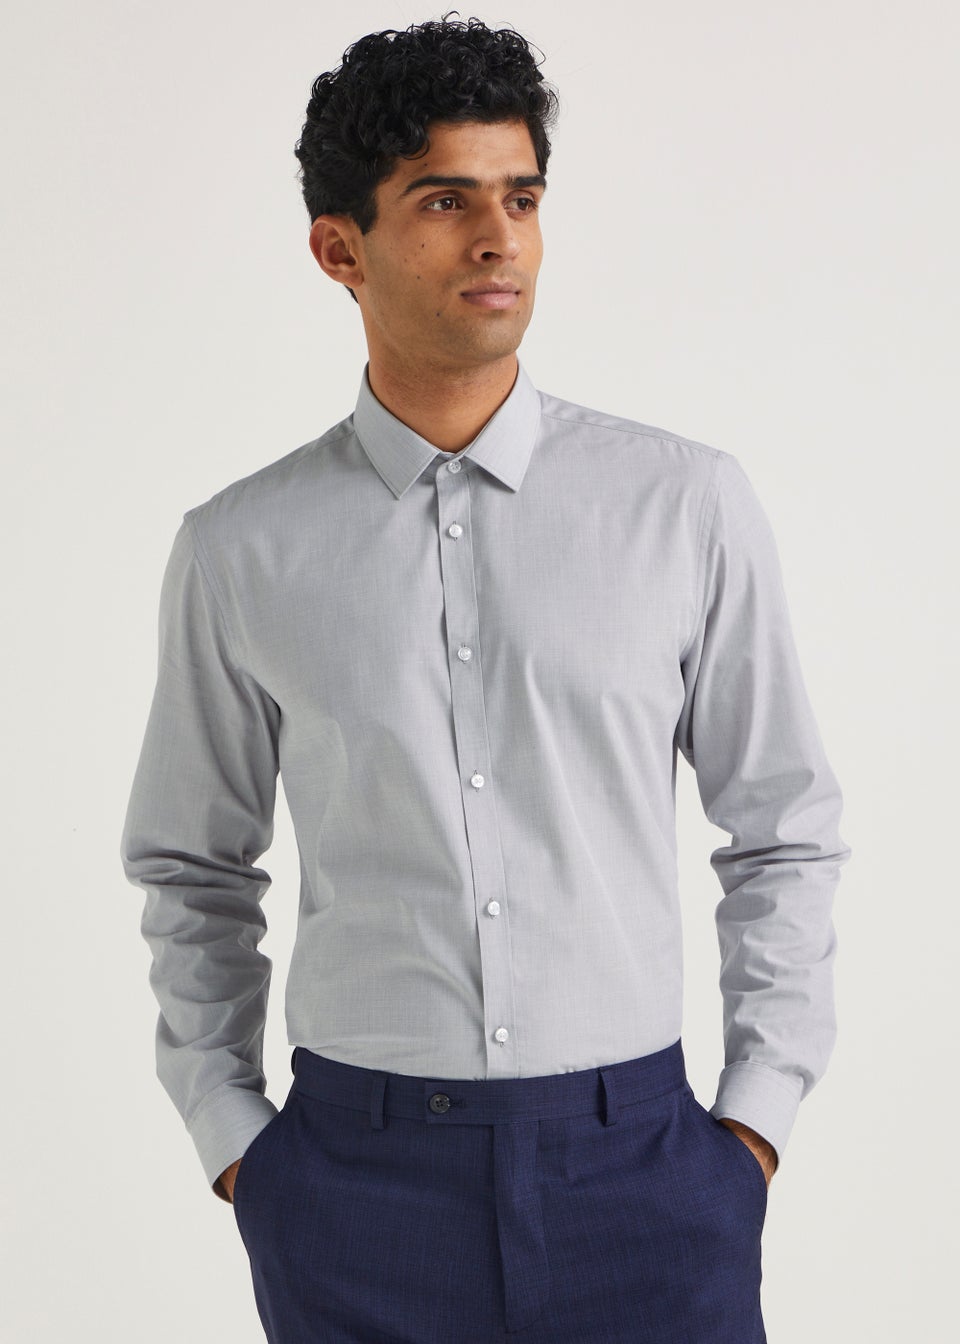 Taylor & Wright Grey Easy Care Slim Fit Shirt